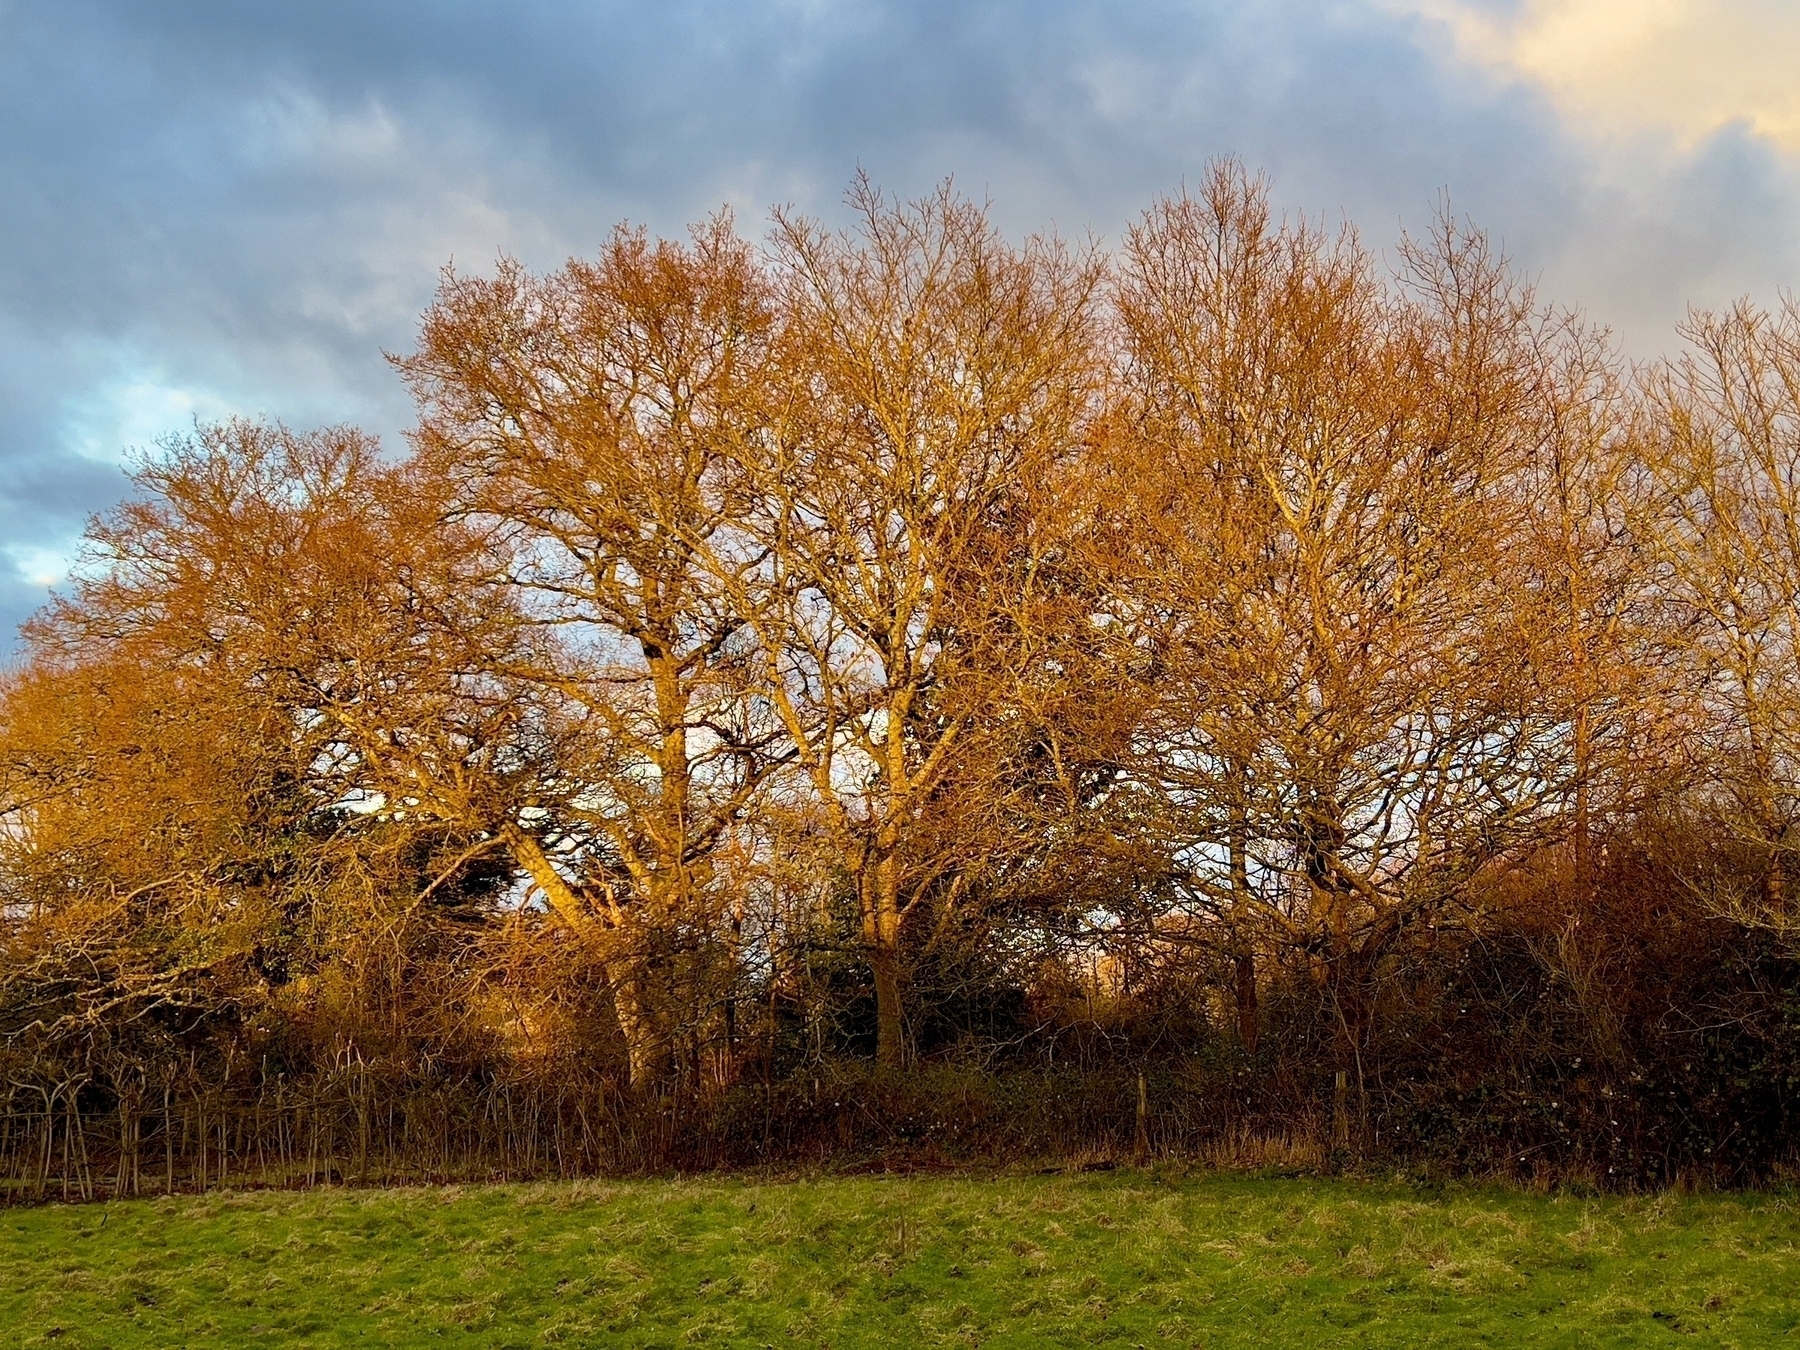 Warm evening light on a stand of Elm